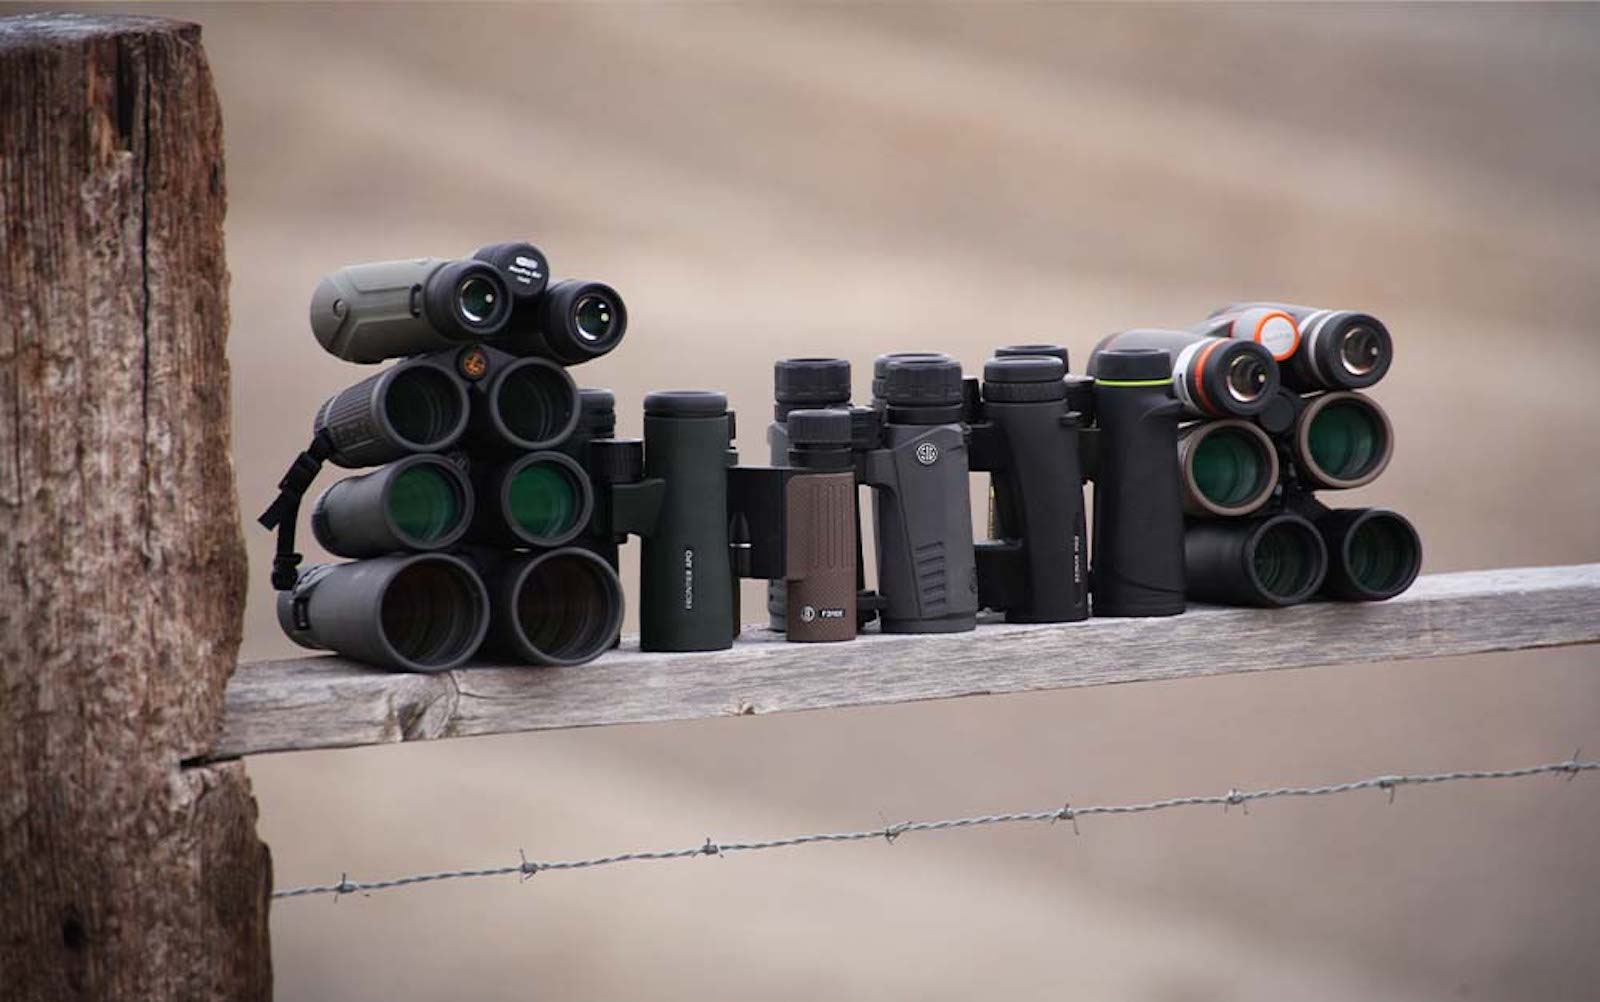 The best binoculars for hunting are comfortable to use, allow you to see animals in low light, and offer performance for the money.